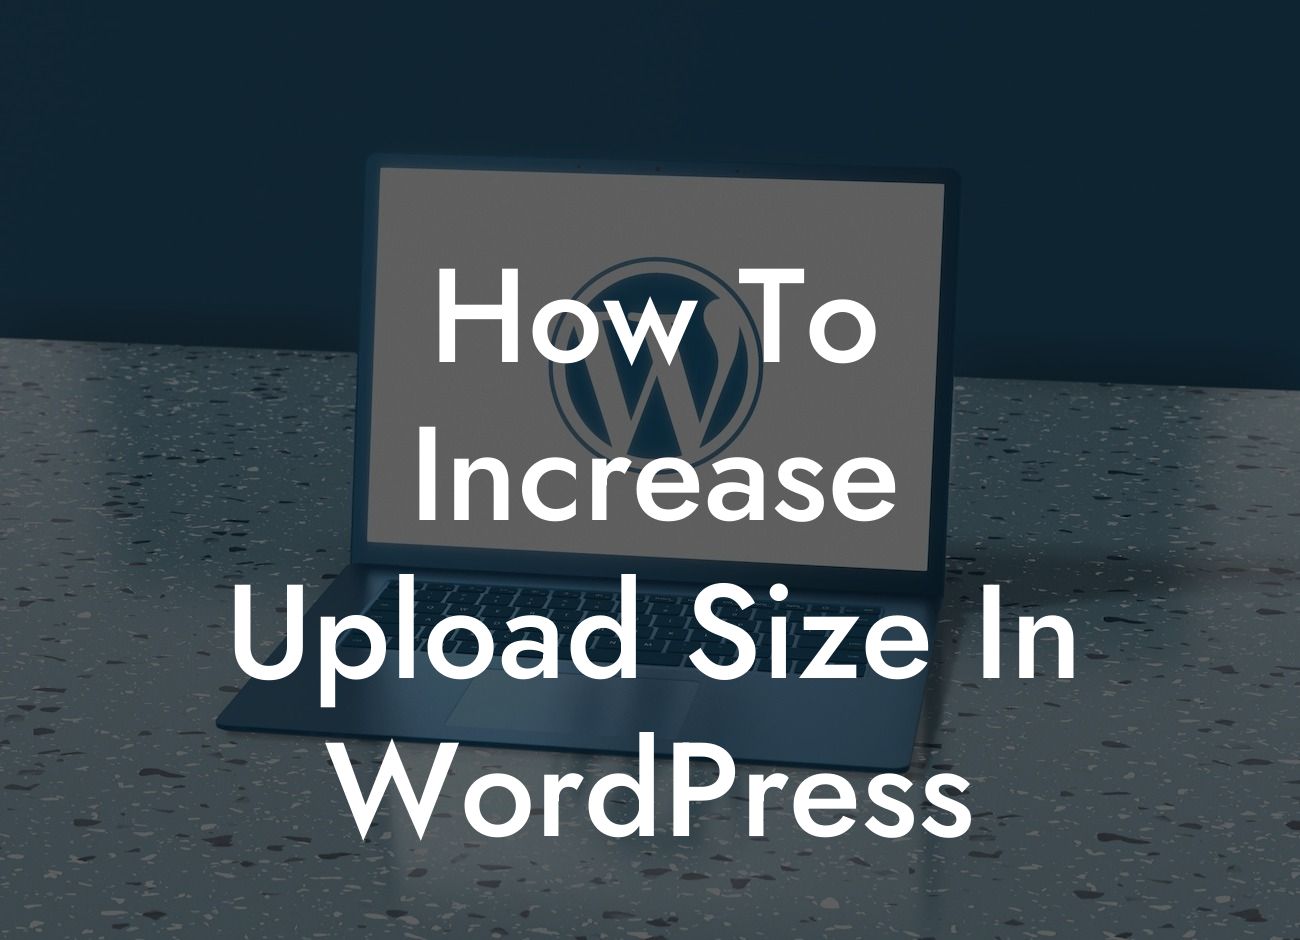 How To Increase Upload Size In WordPress